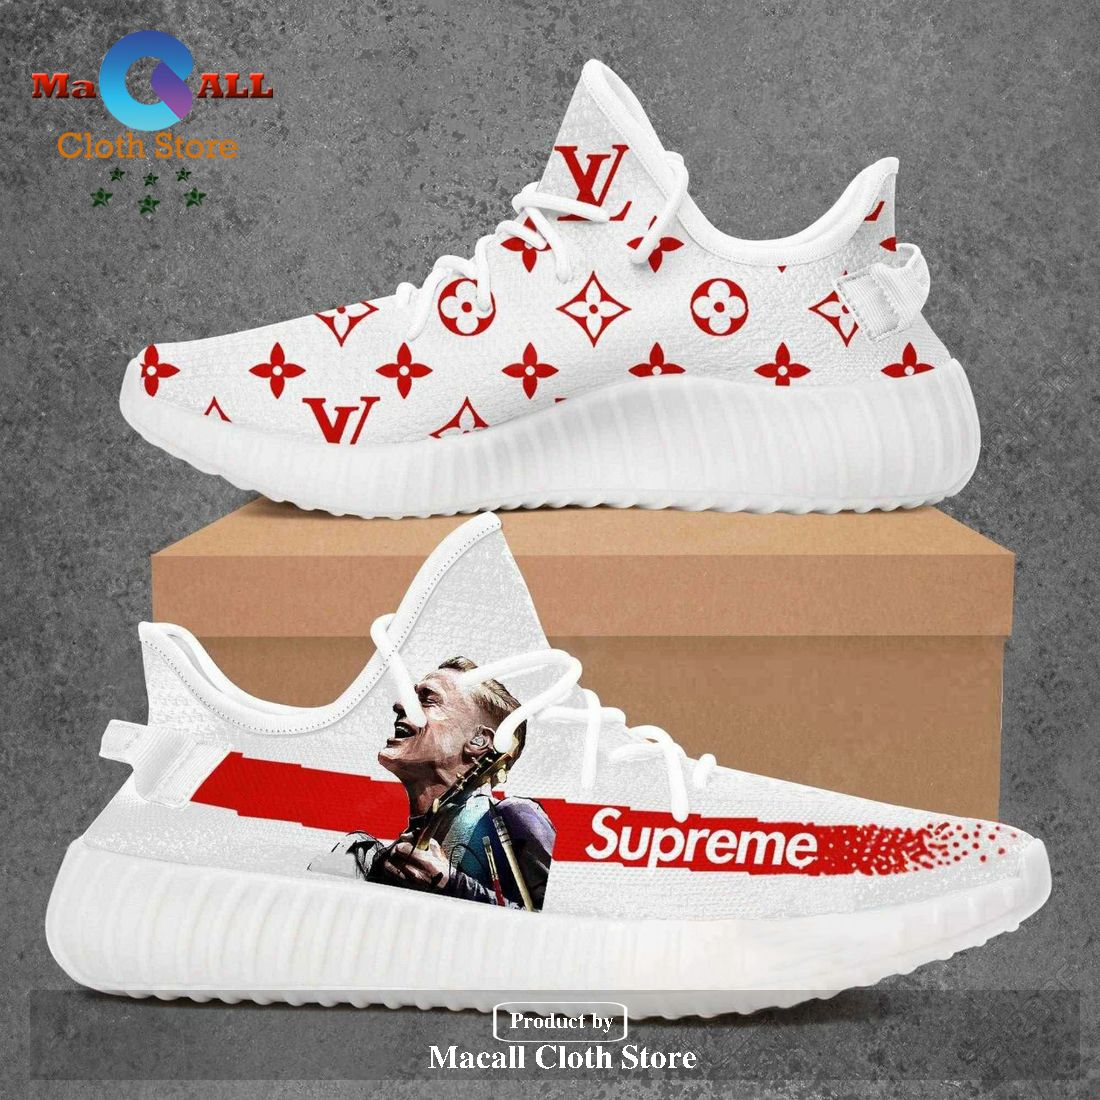 Louis Vuitton Supreme Bryan Adams Yeezy Boost Shoes Sport Sneakers Luxury  Brand For Men And Women - Macall Cloth Store - Destination for fashionistas